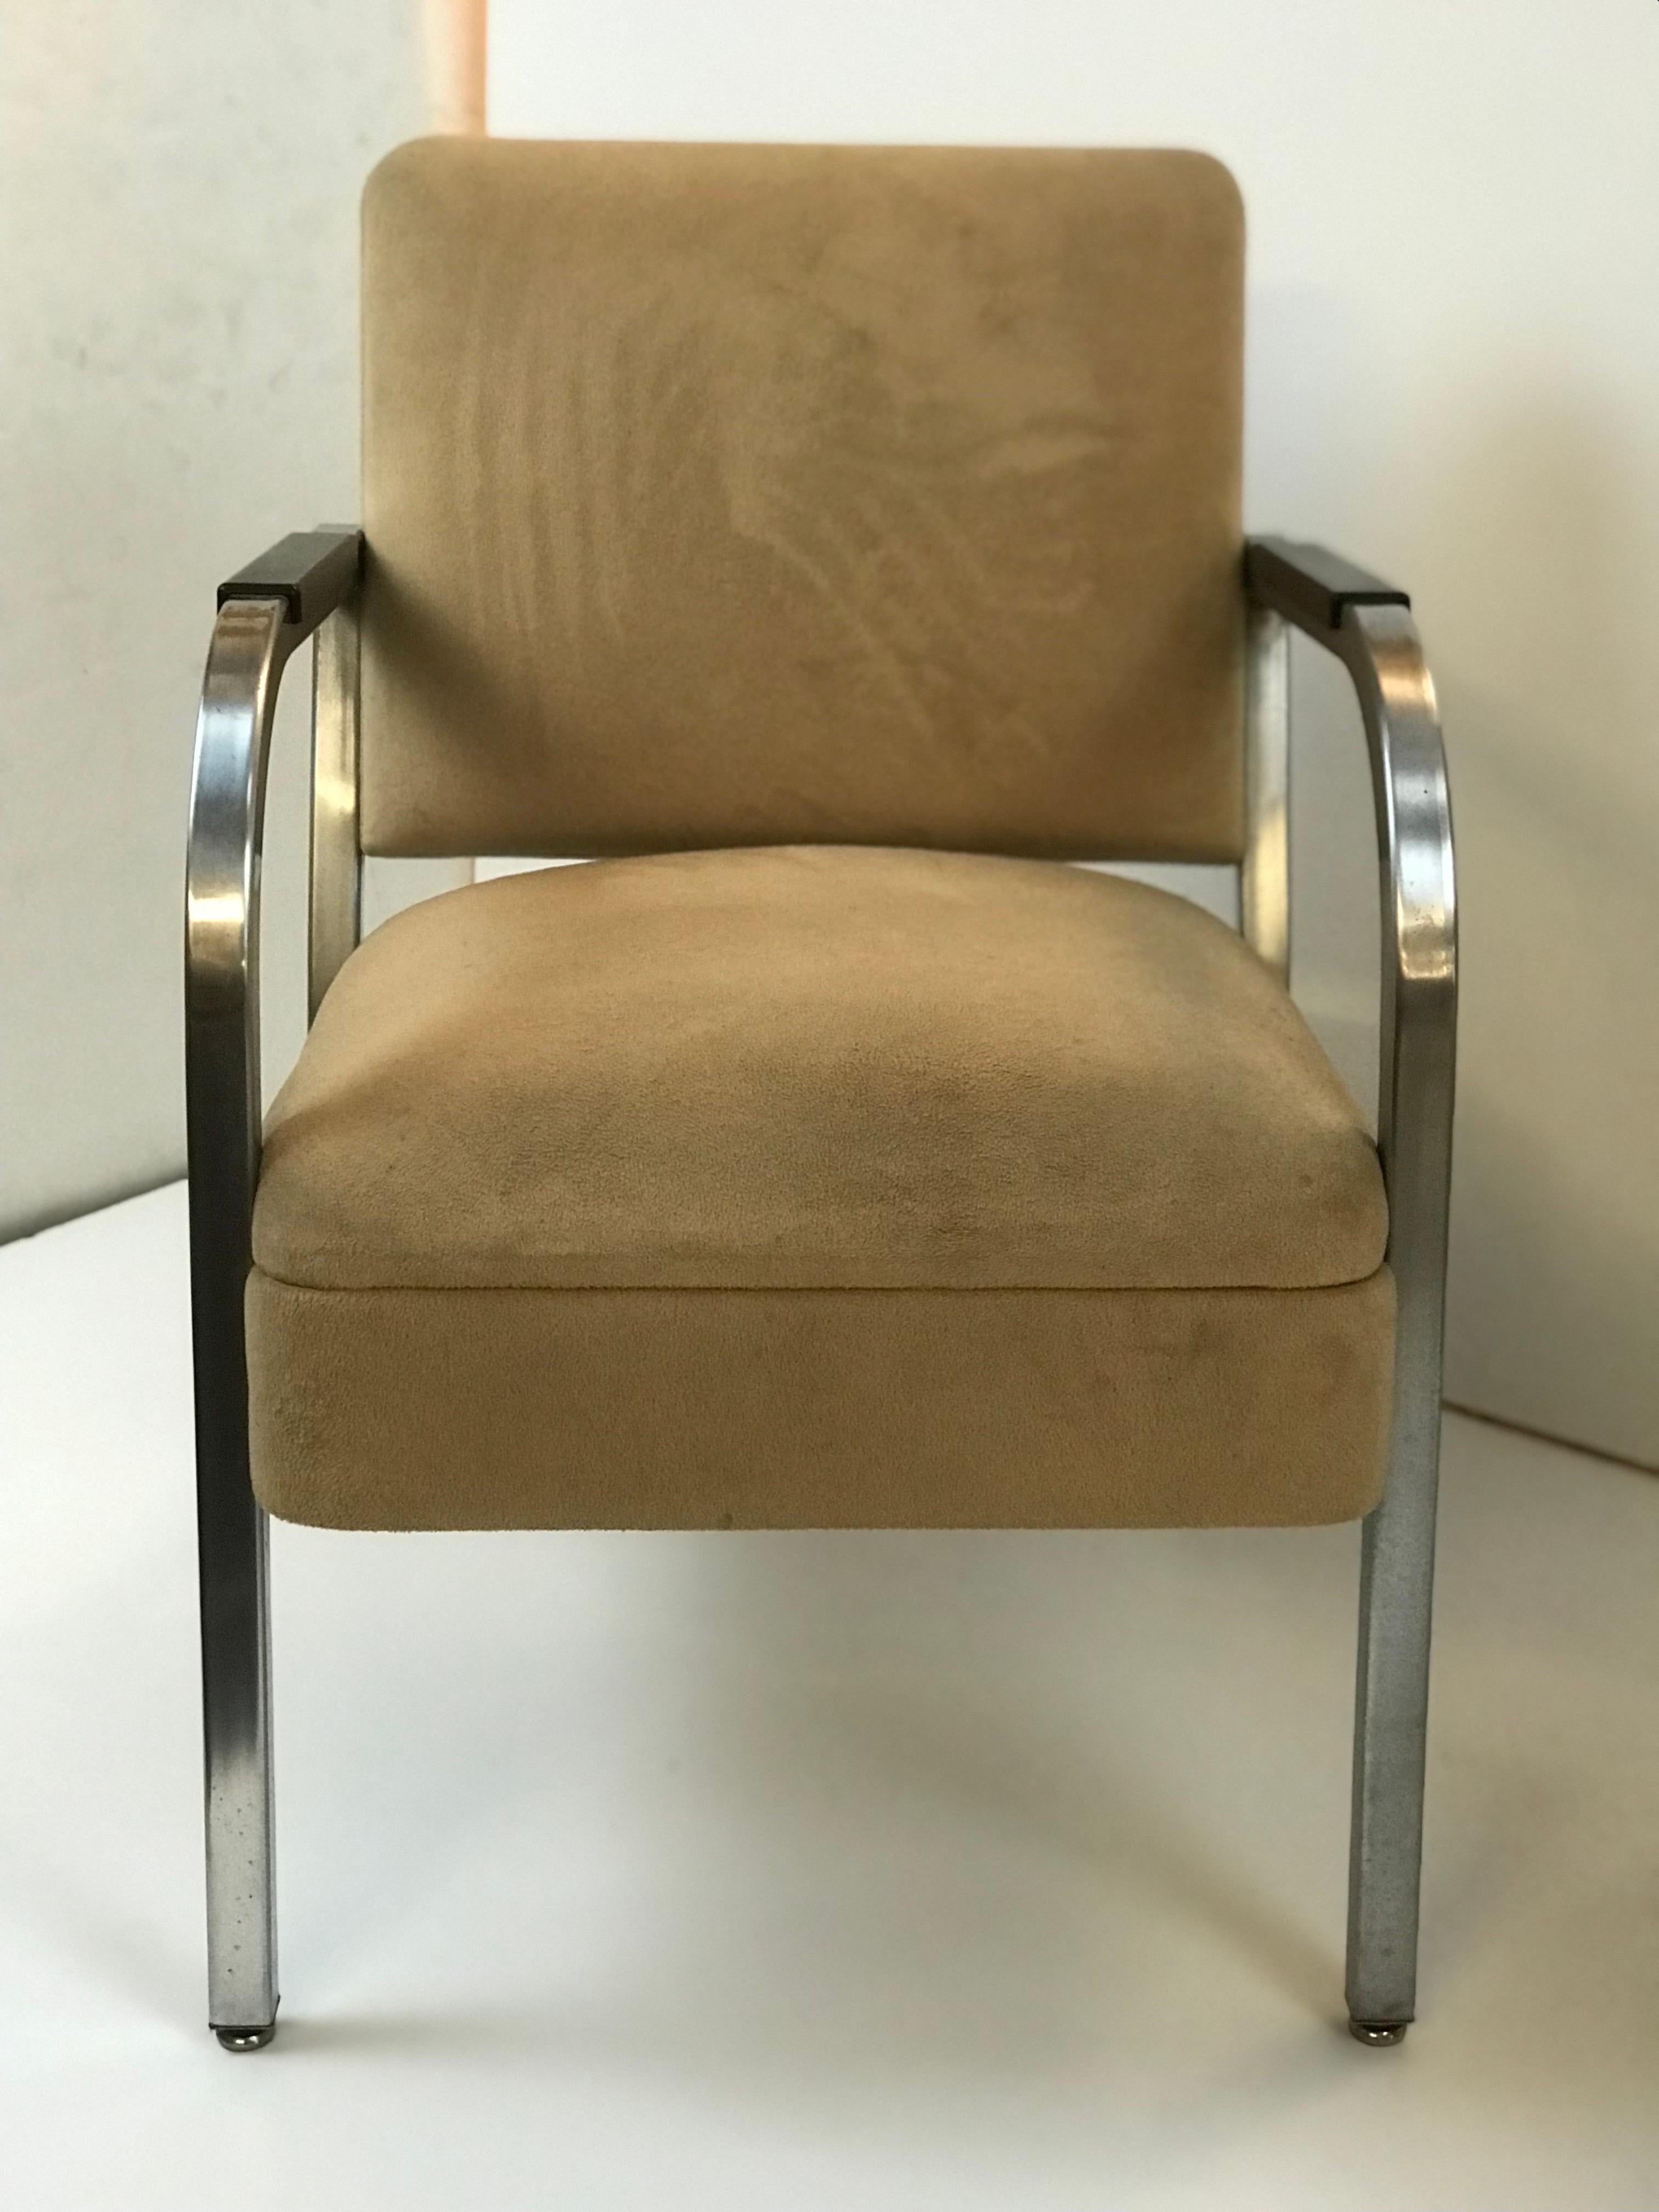 A Pair of Petite Square Tubing 1960's Club Chairs IMO Shaw Walker or Goodform,   2